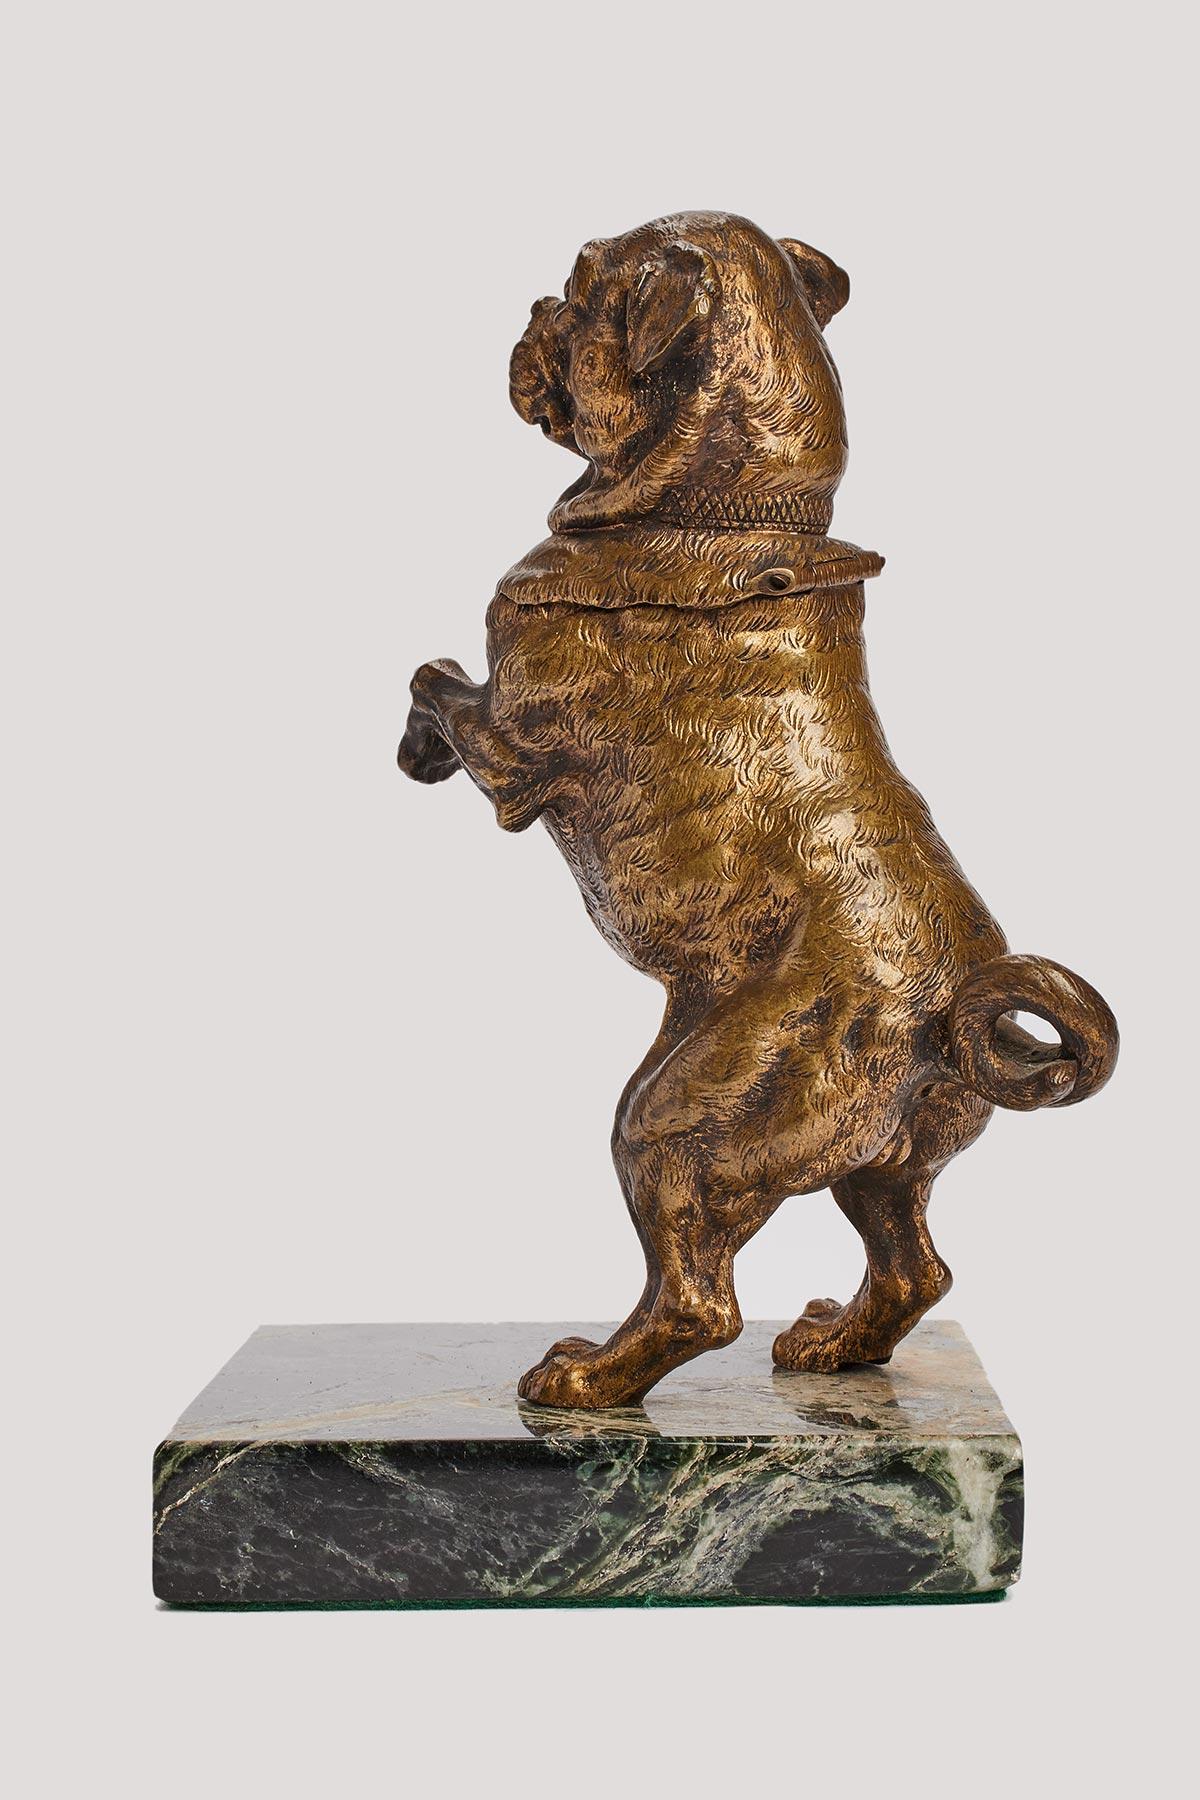 Lost wax processed inkwell depicting a pug dog, standing over a green marble base. Head reclines revealing the ink reservoir. Original patina, Vienna, 1890 ca.